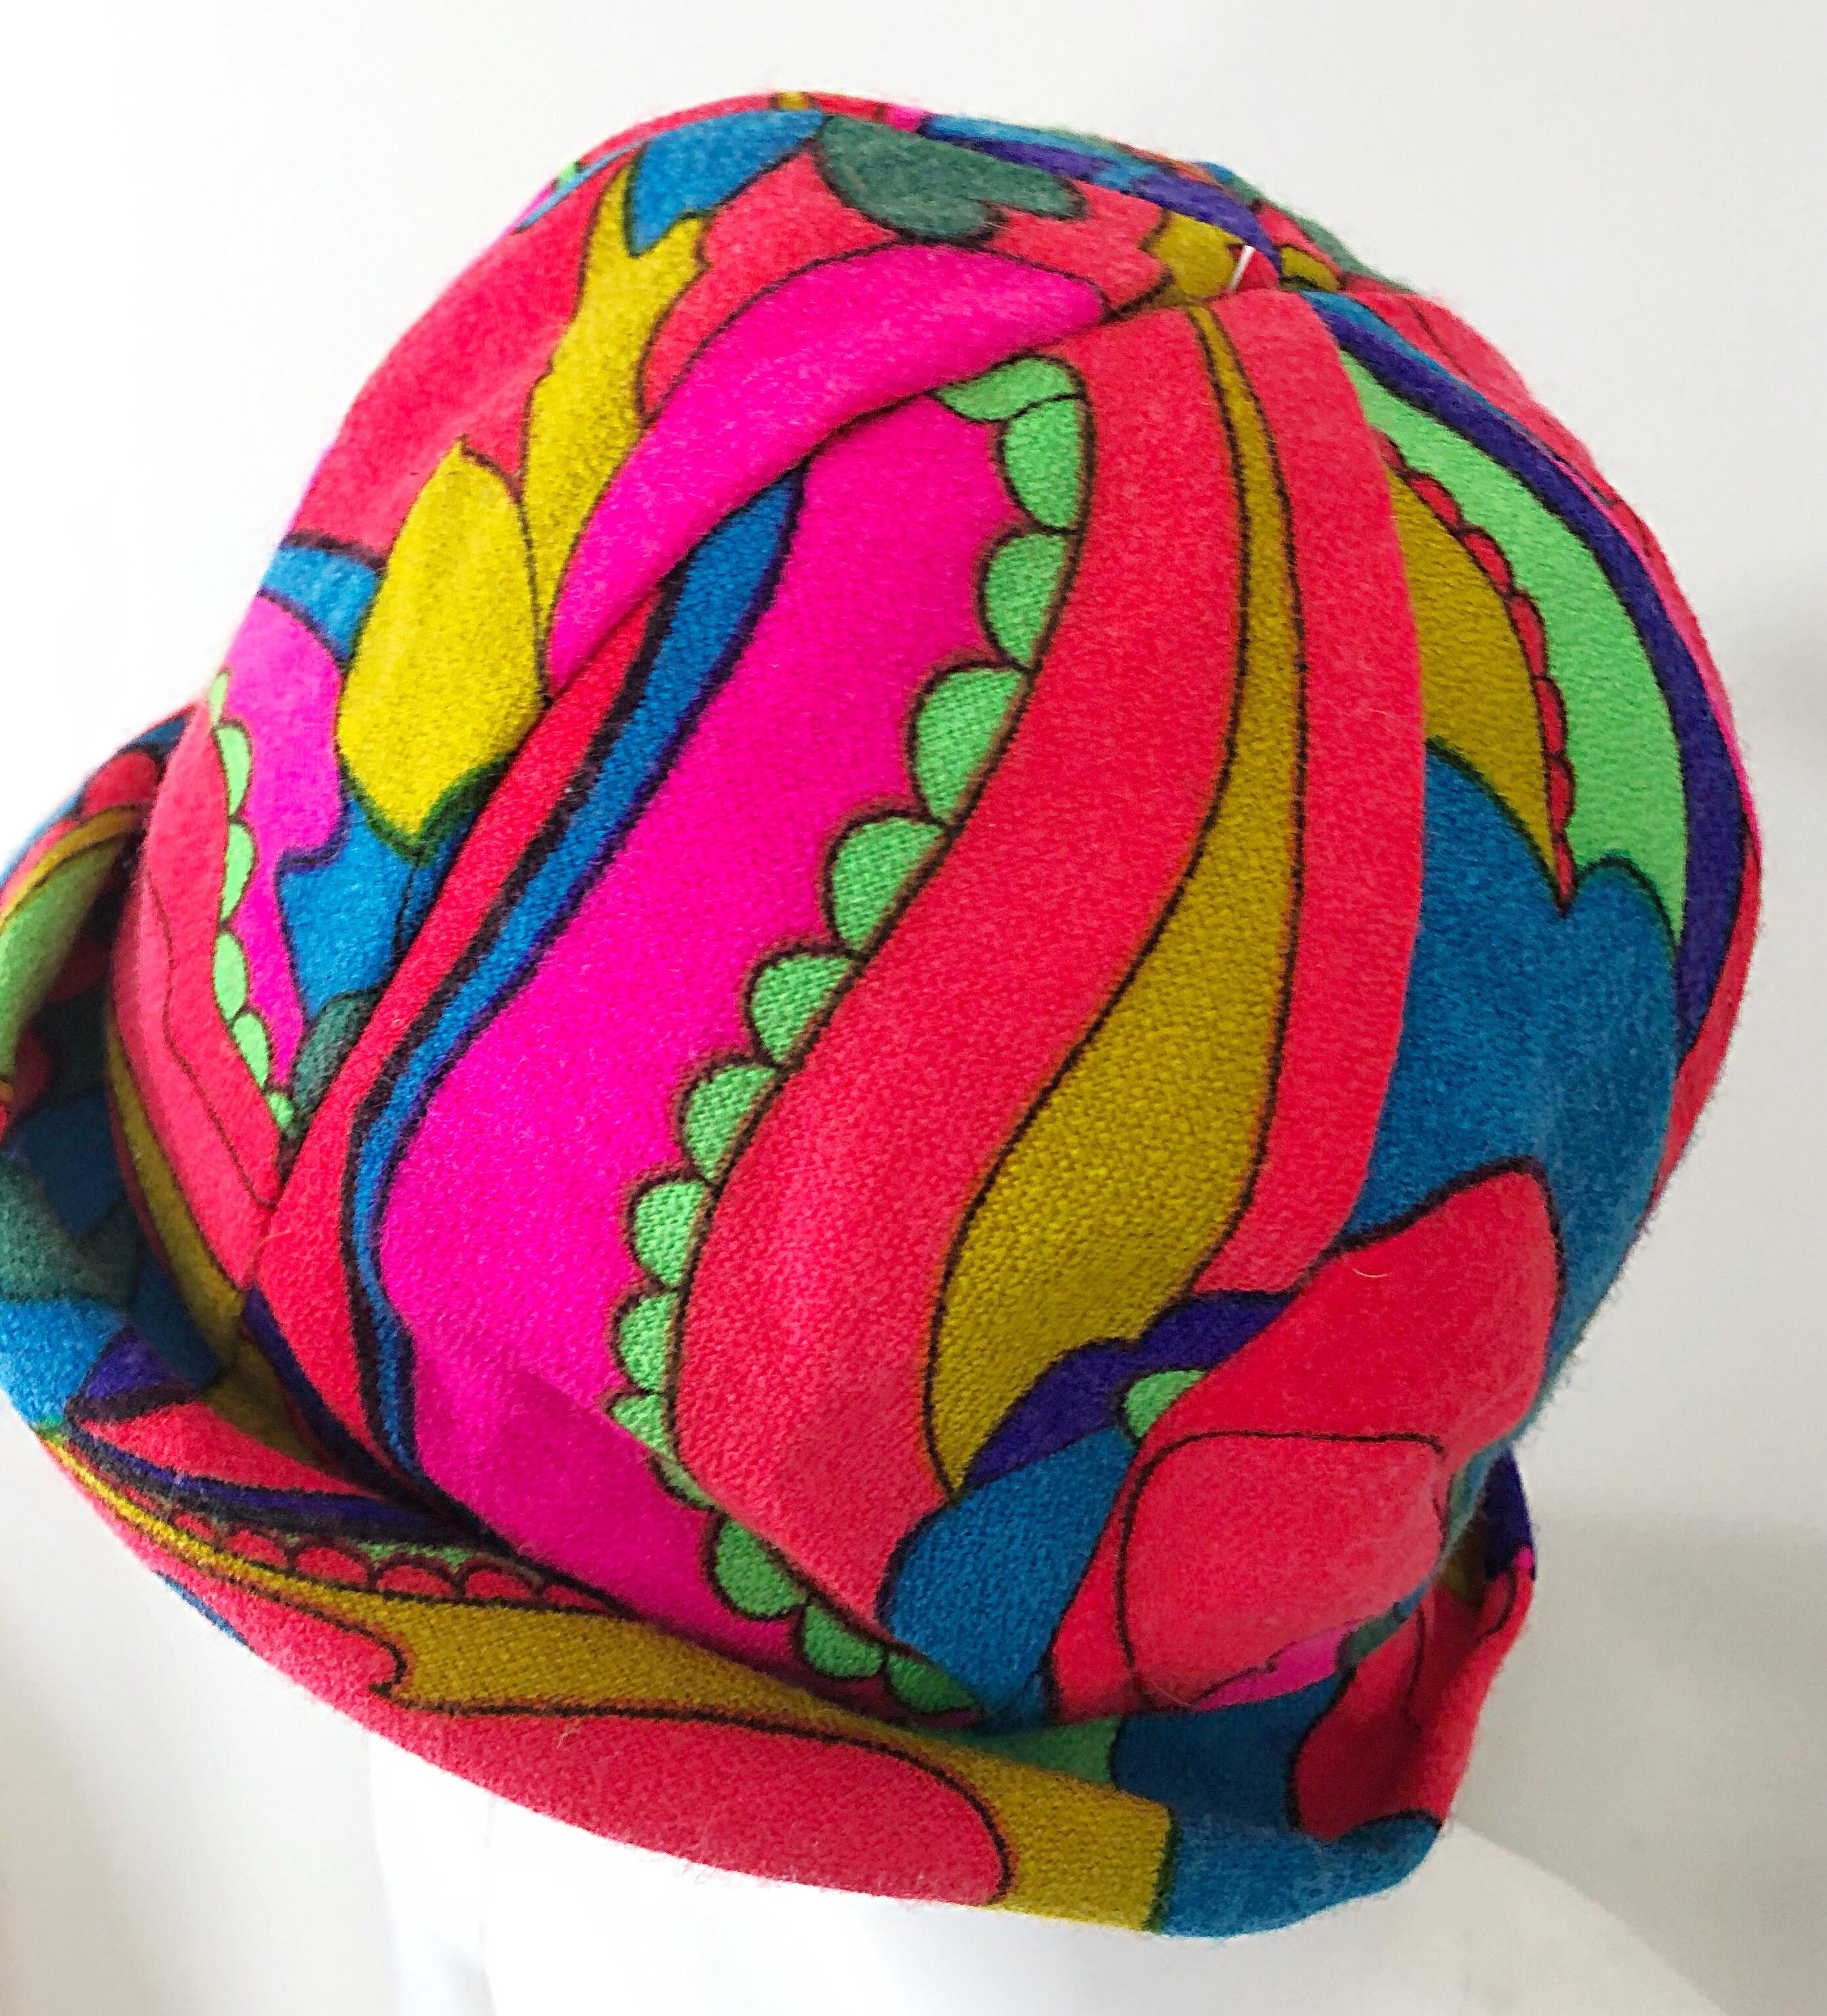 This 1960s MR. MARTIN cloche hat is the epitome of the 60s! Vibrant colors of hot pink, blue, green, orange, and yellow throughout. Soft lightweight virgin wool is perfect for any time of year, and is lined. Great with jeans, or a dress. In great